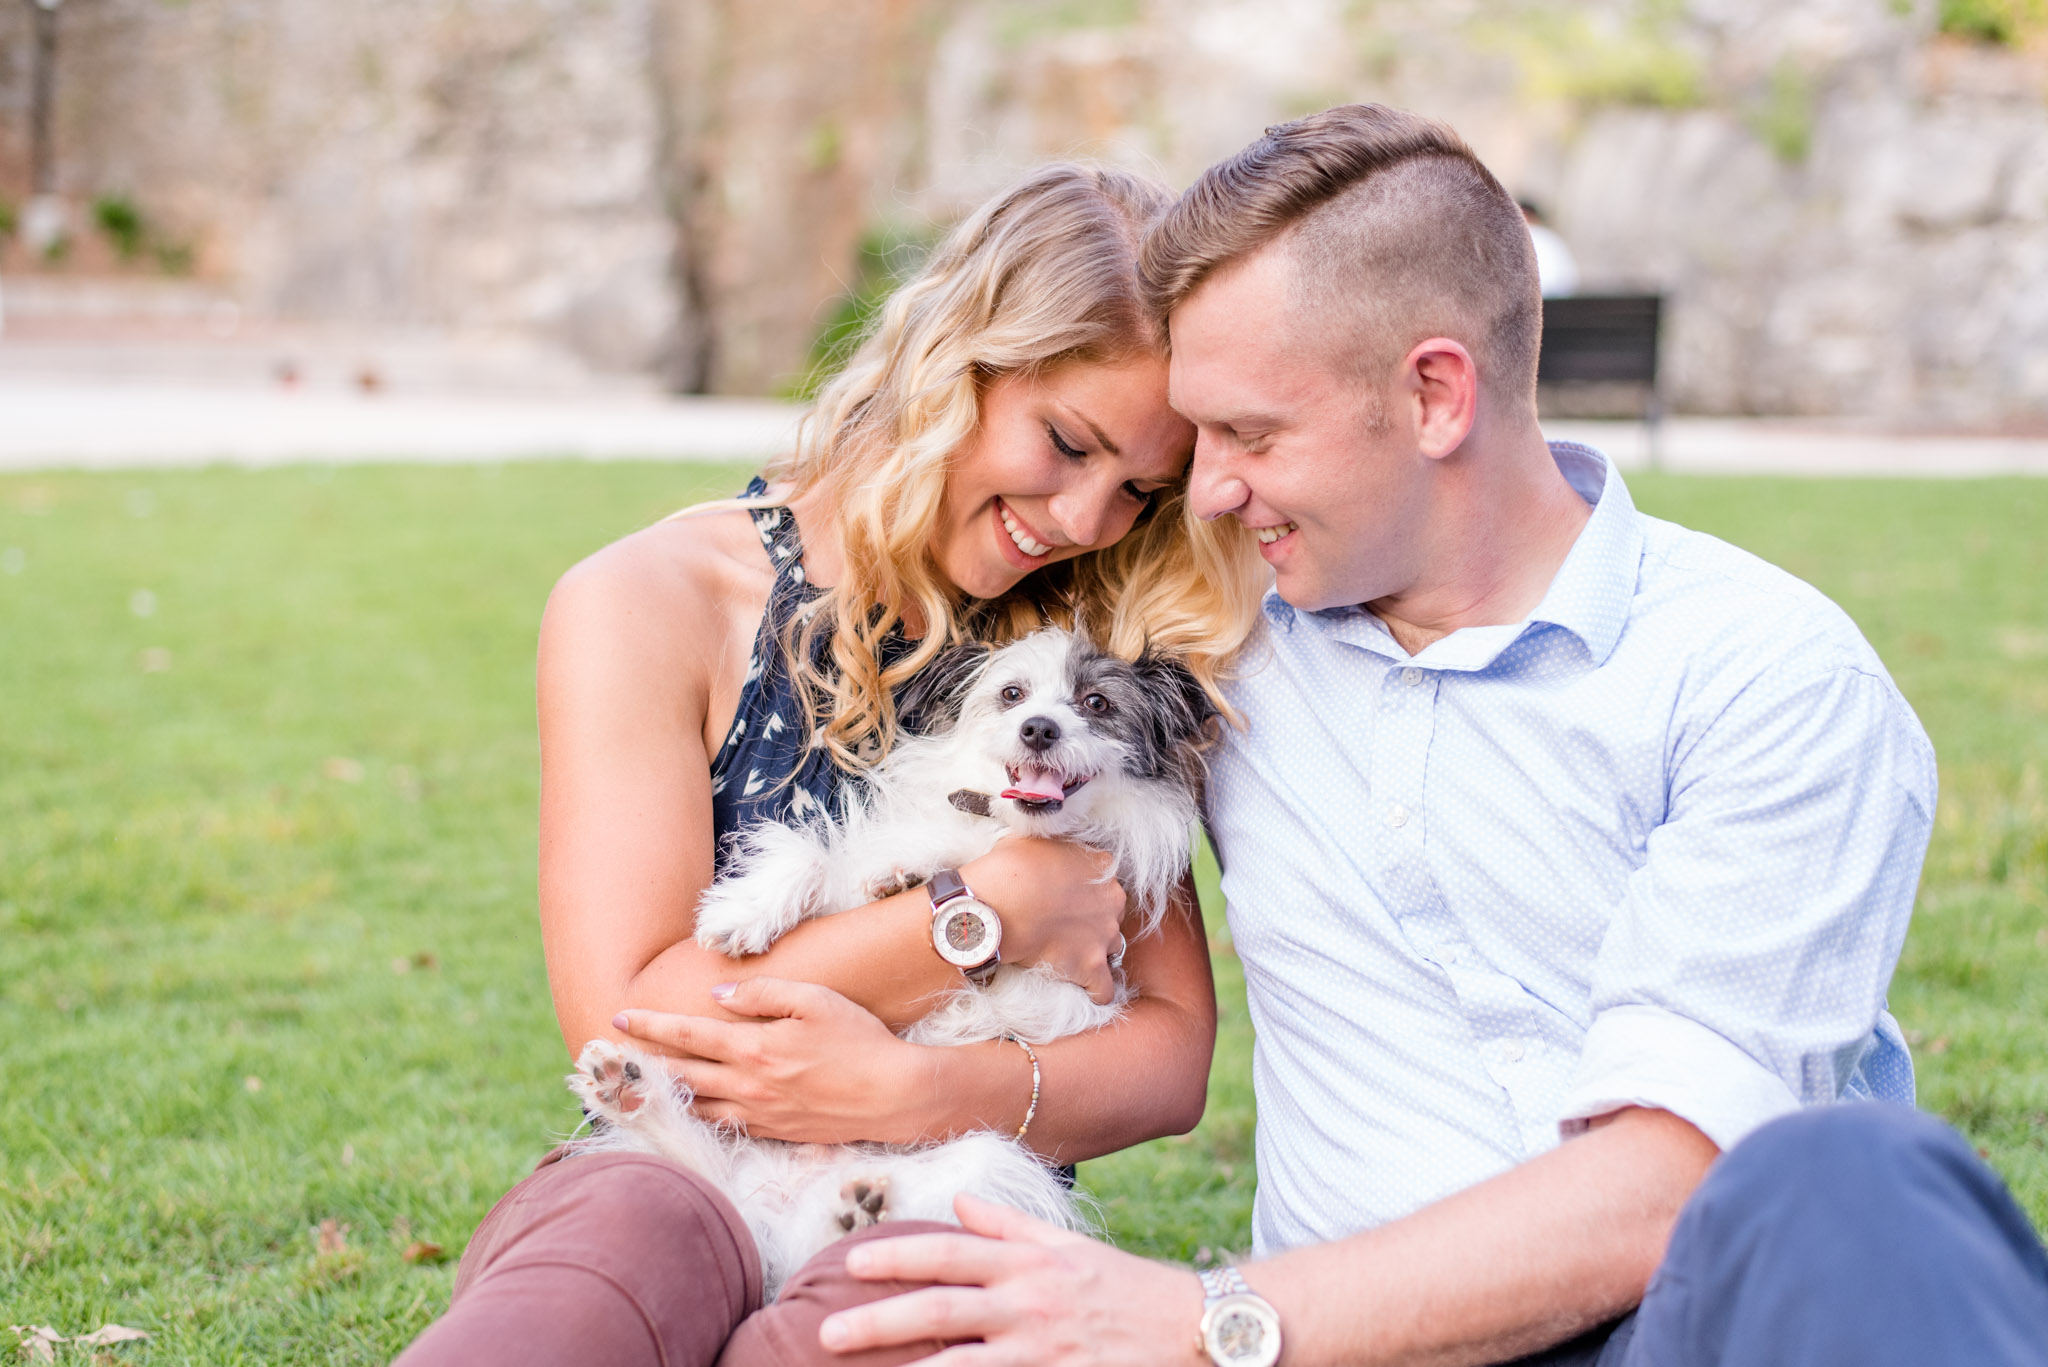 Engaged couple plays with dog.